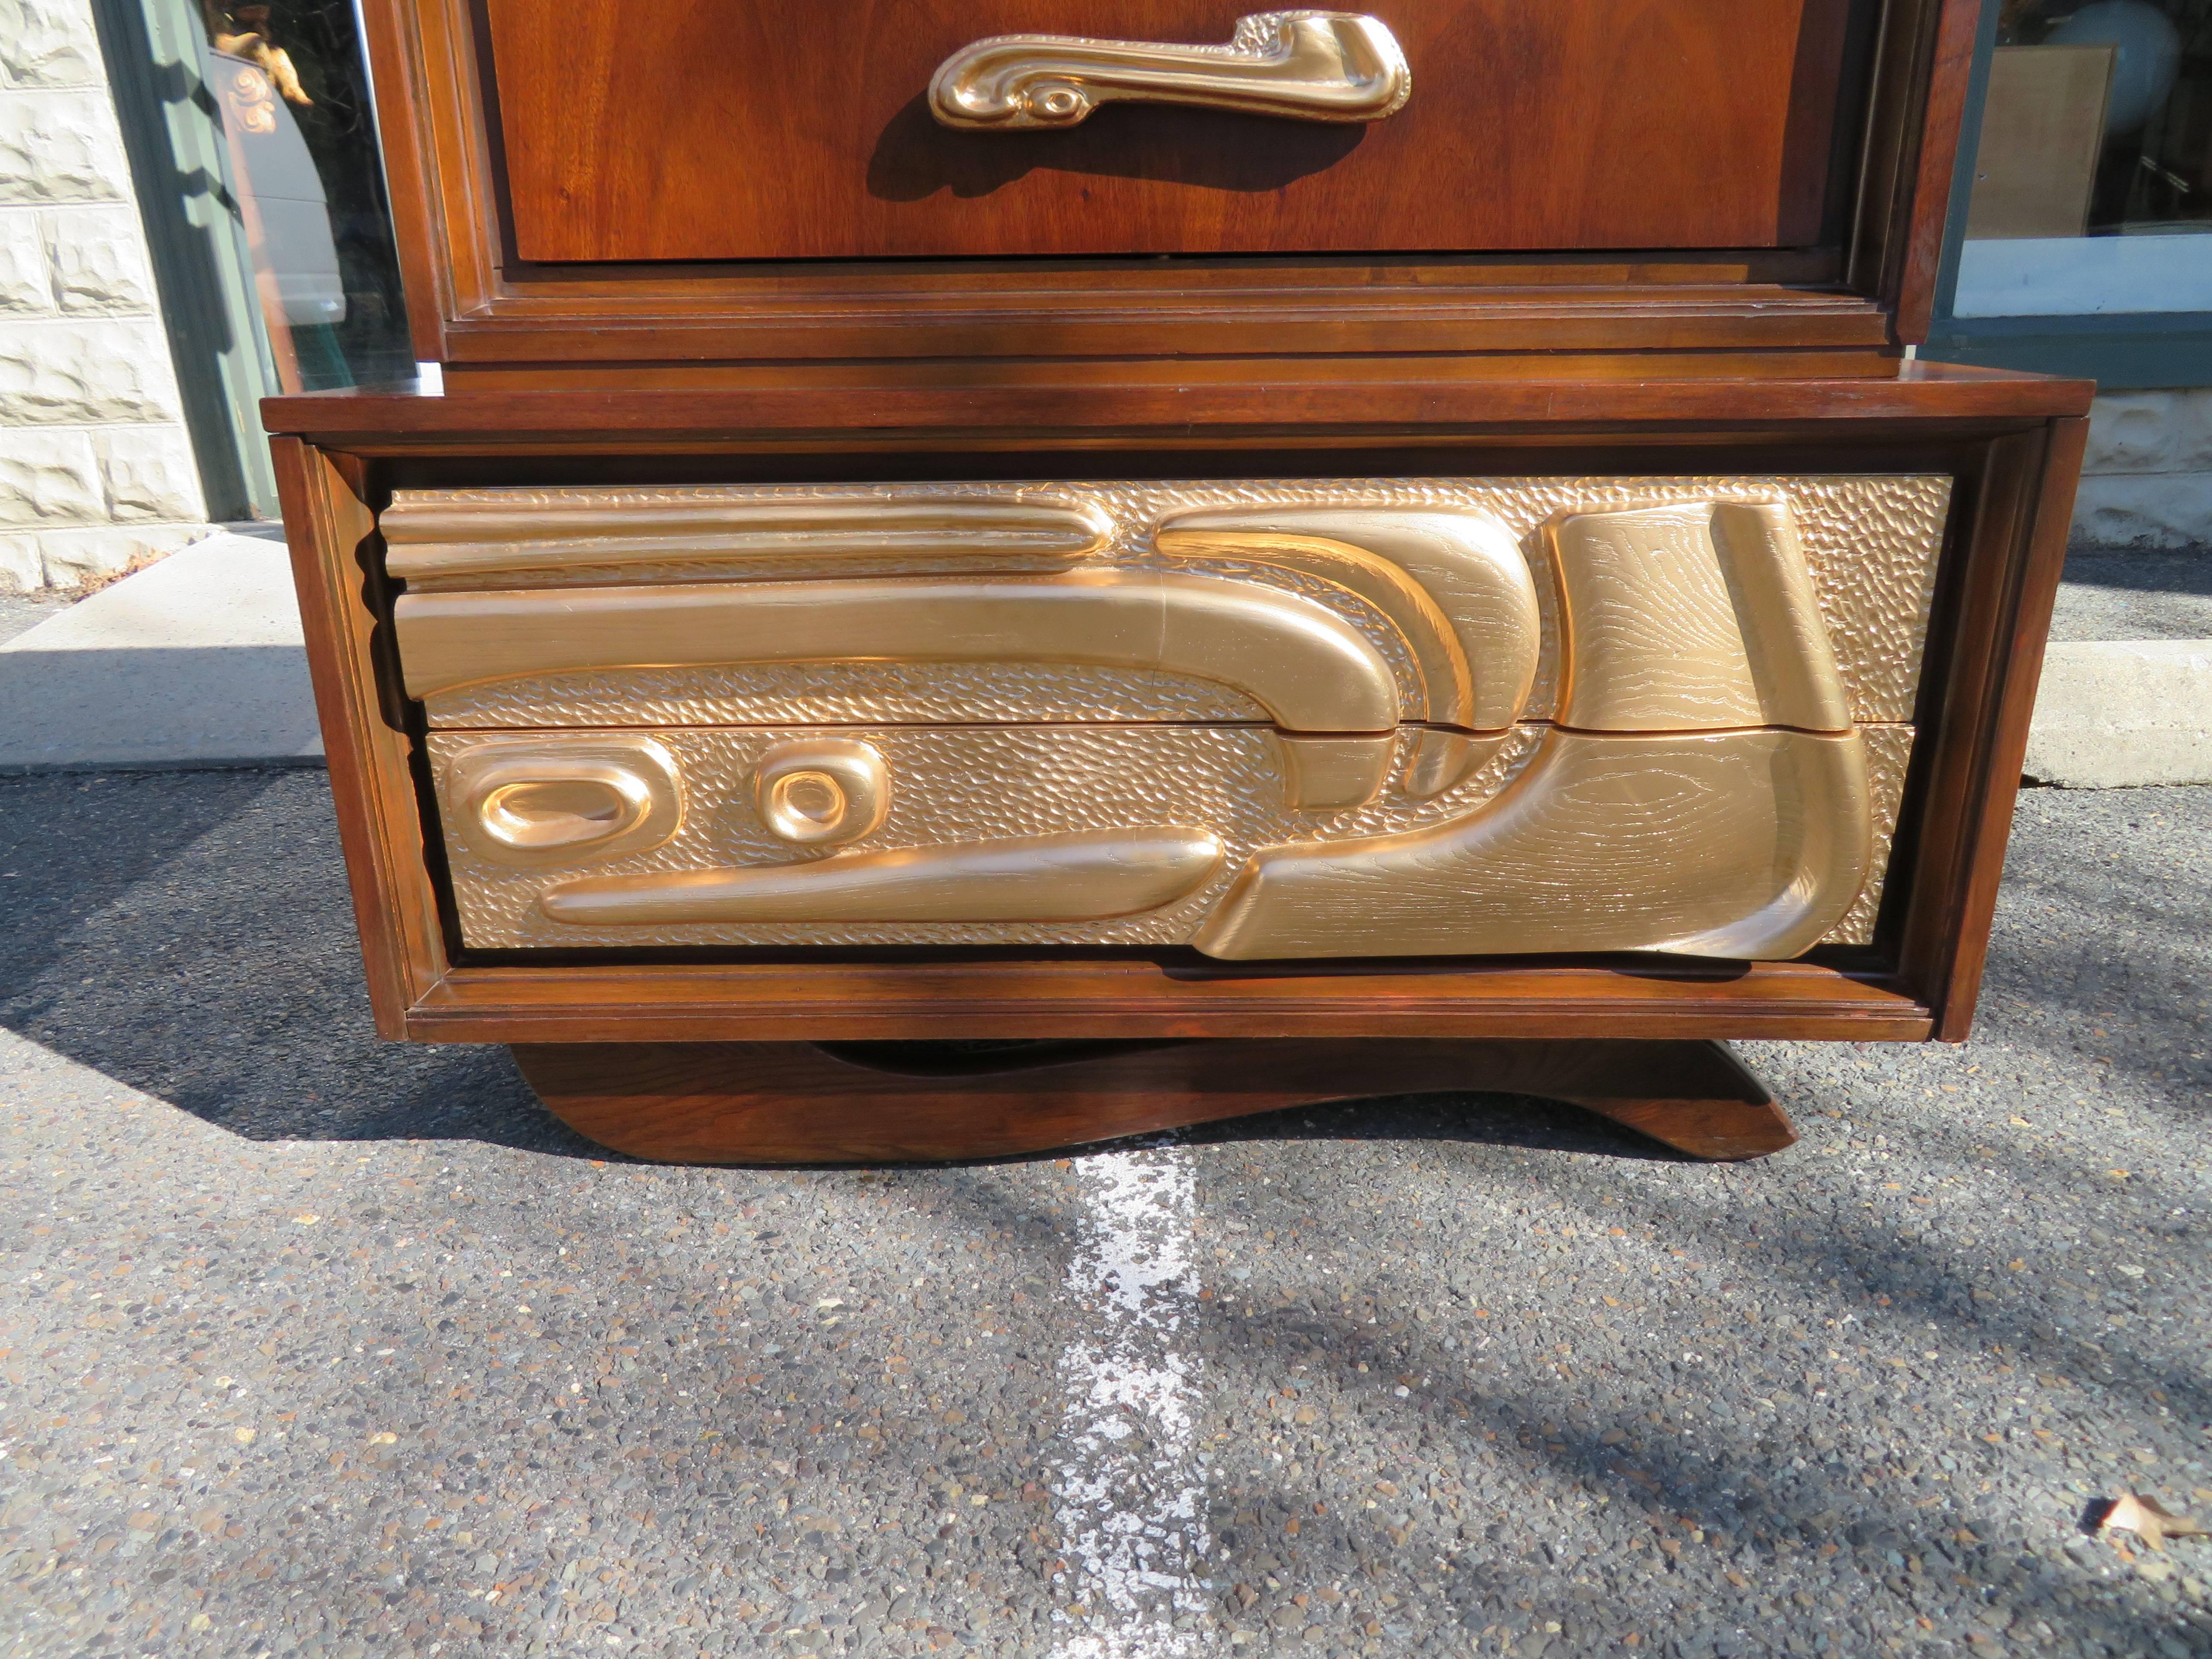 Fabulous sculptural Mid-Century Modern tall chest by Pulaski often attributed to Witco. This highboy is large and offers ample storage. Features four upper drawers with sculpted gold handles and two gilded gold bottom drawers-a real statement piece.